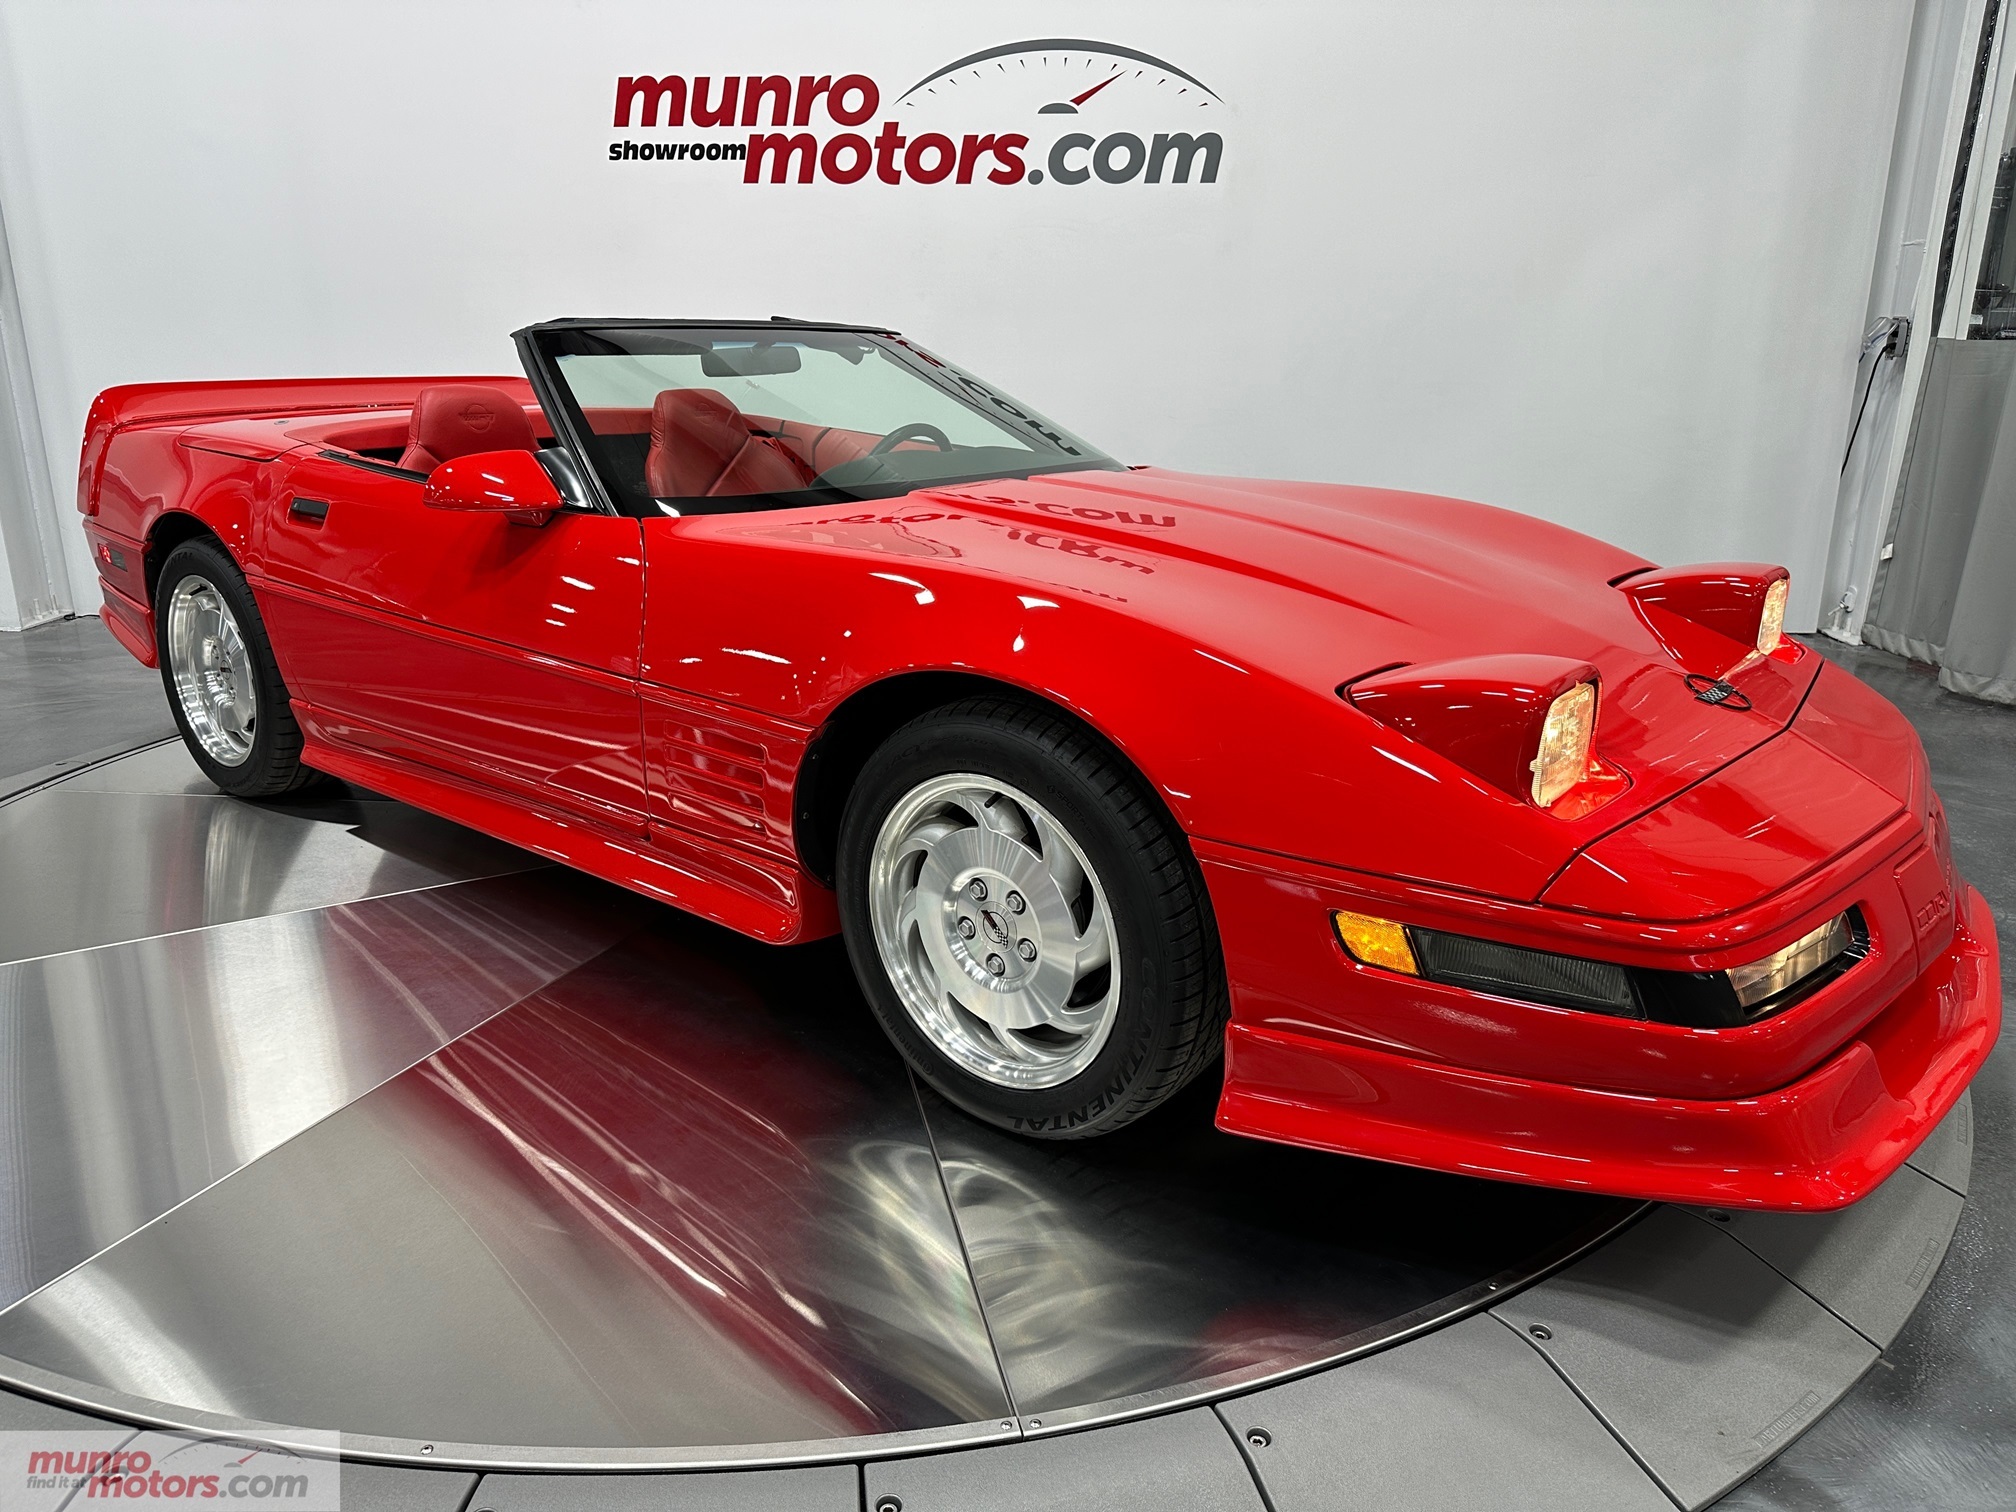 1994 Chevrolet Corvette Convertible Ground FX Auto New Tires only 17K kms!